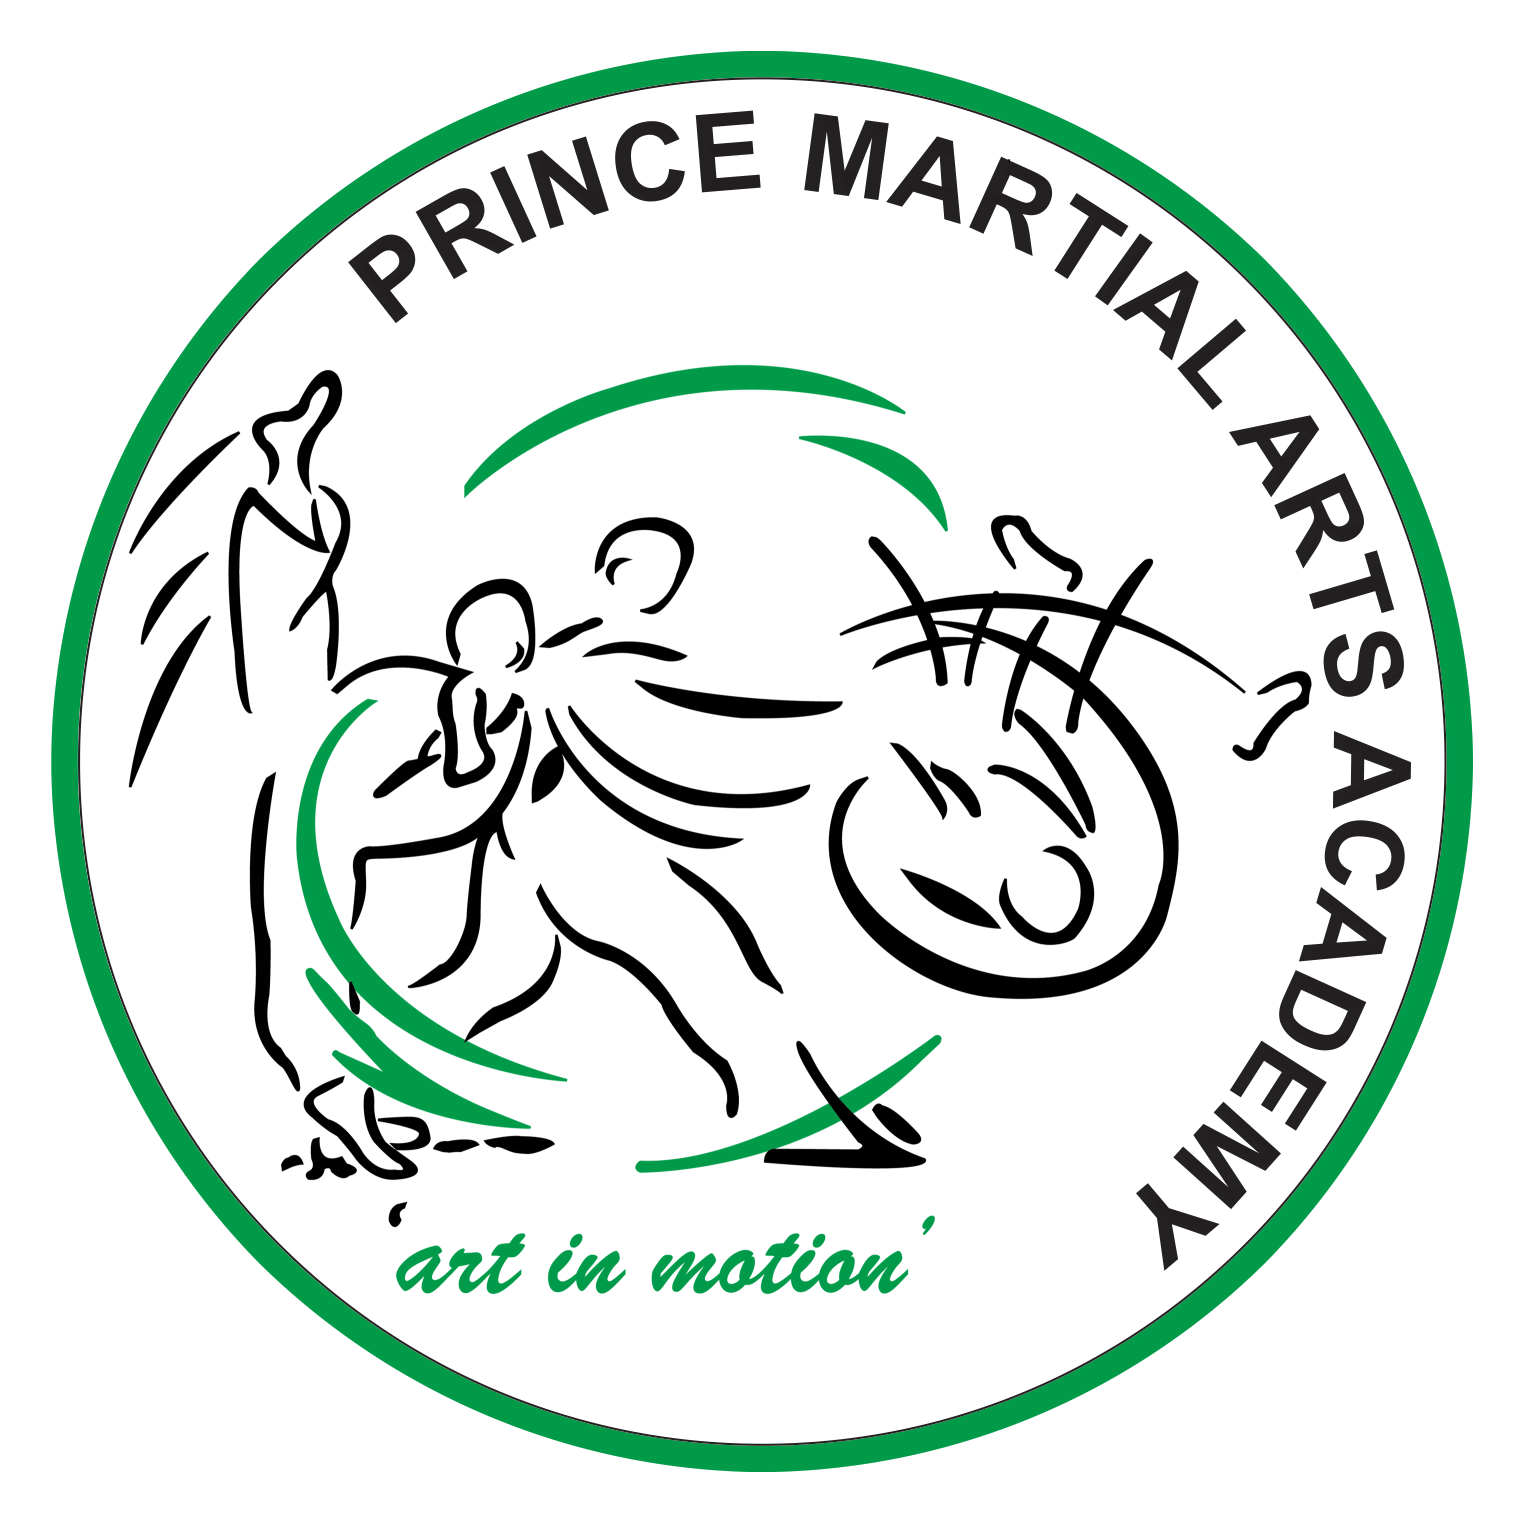 More about Prince Martial Arts Academy